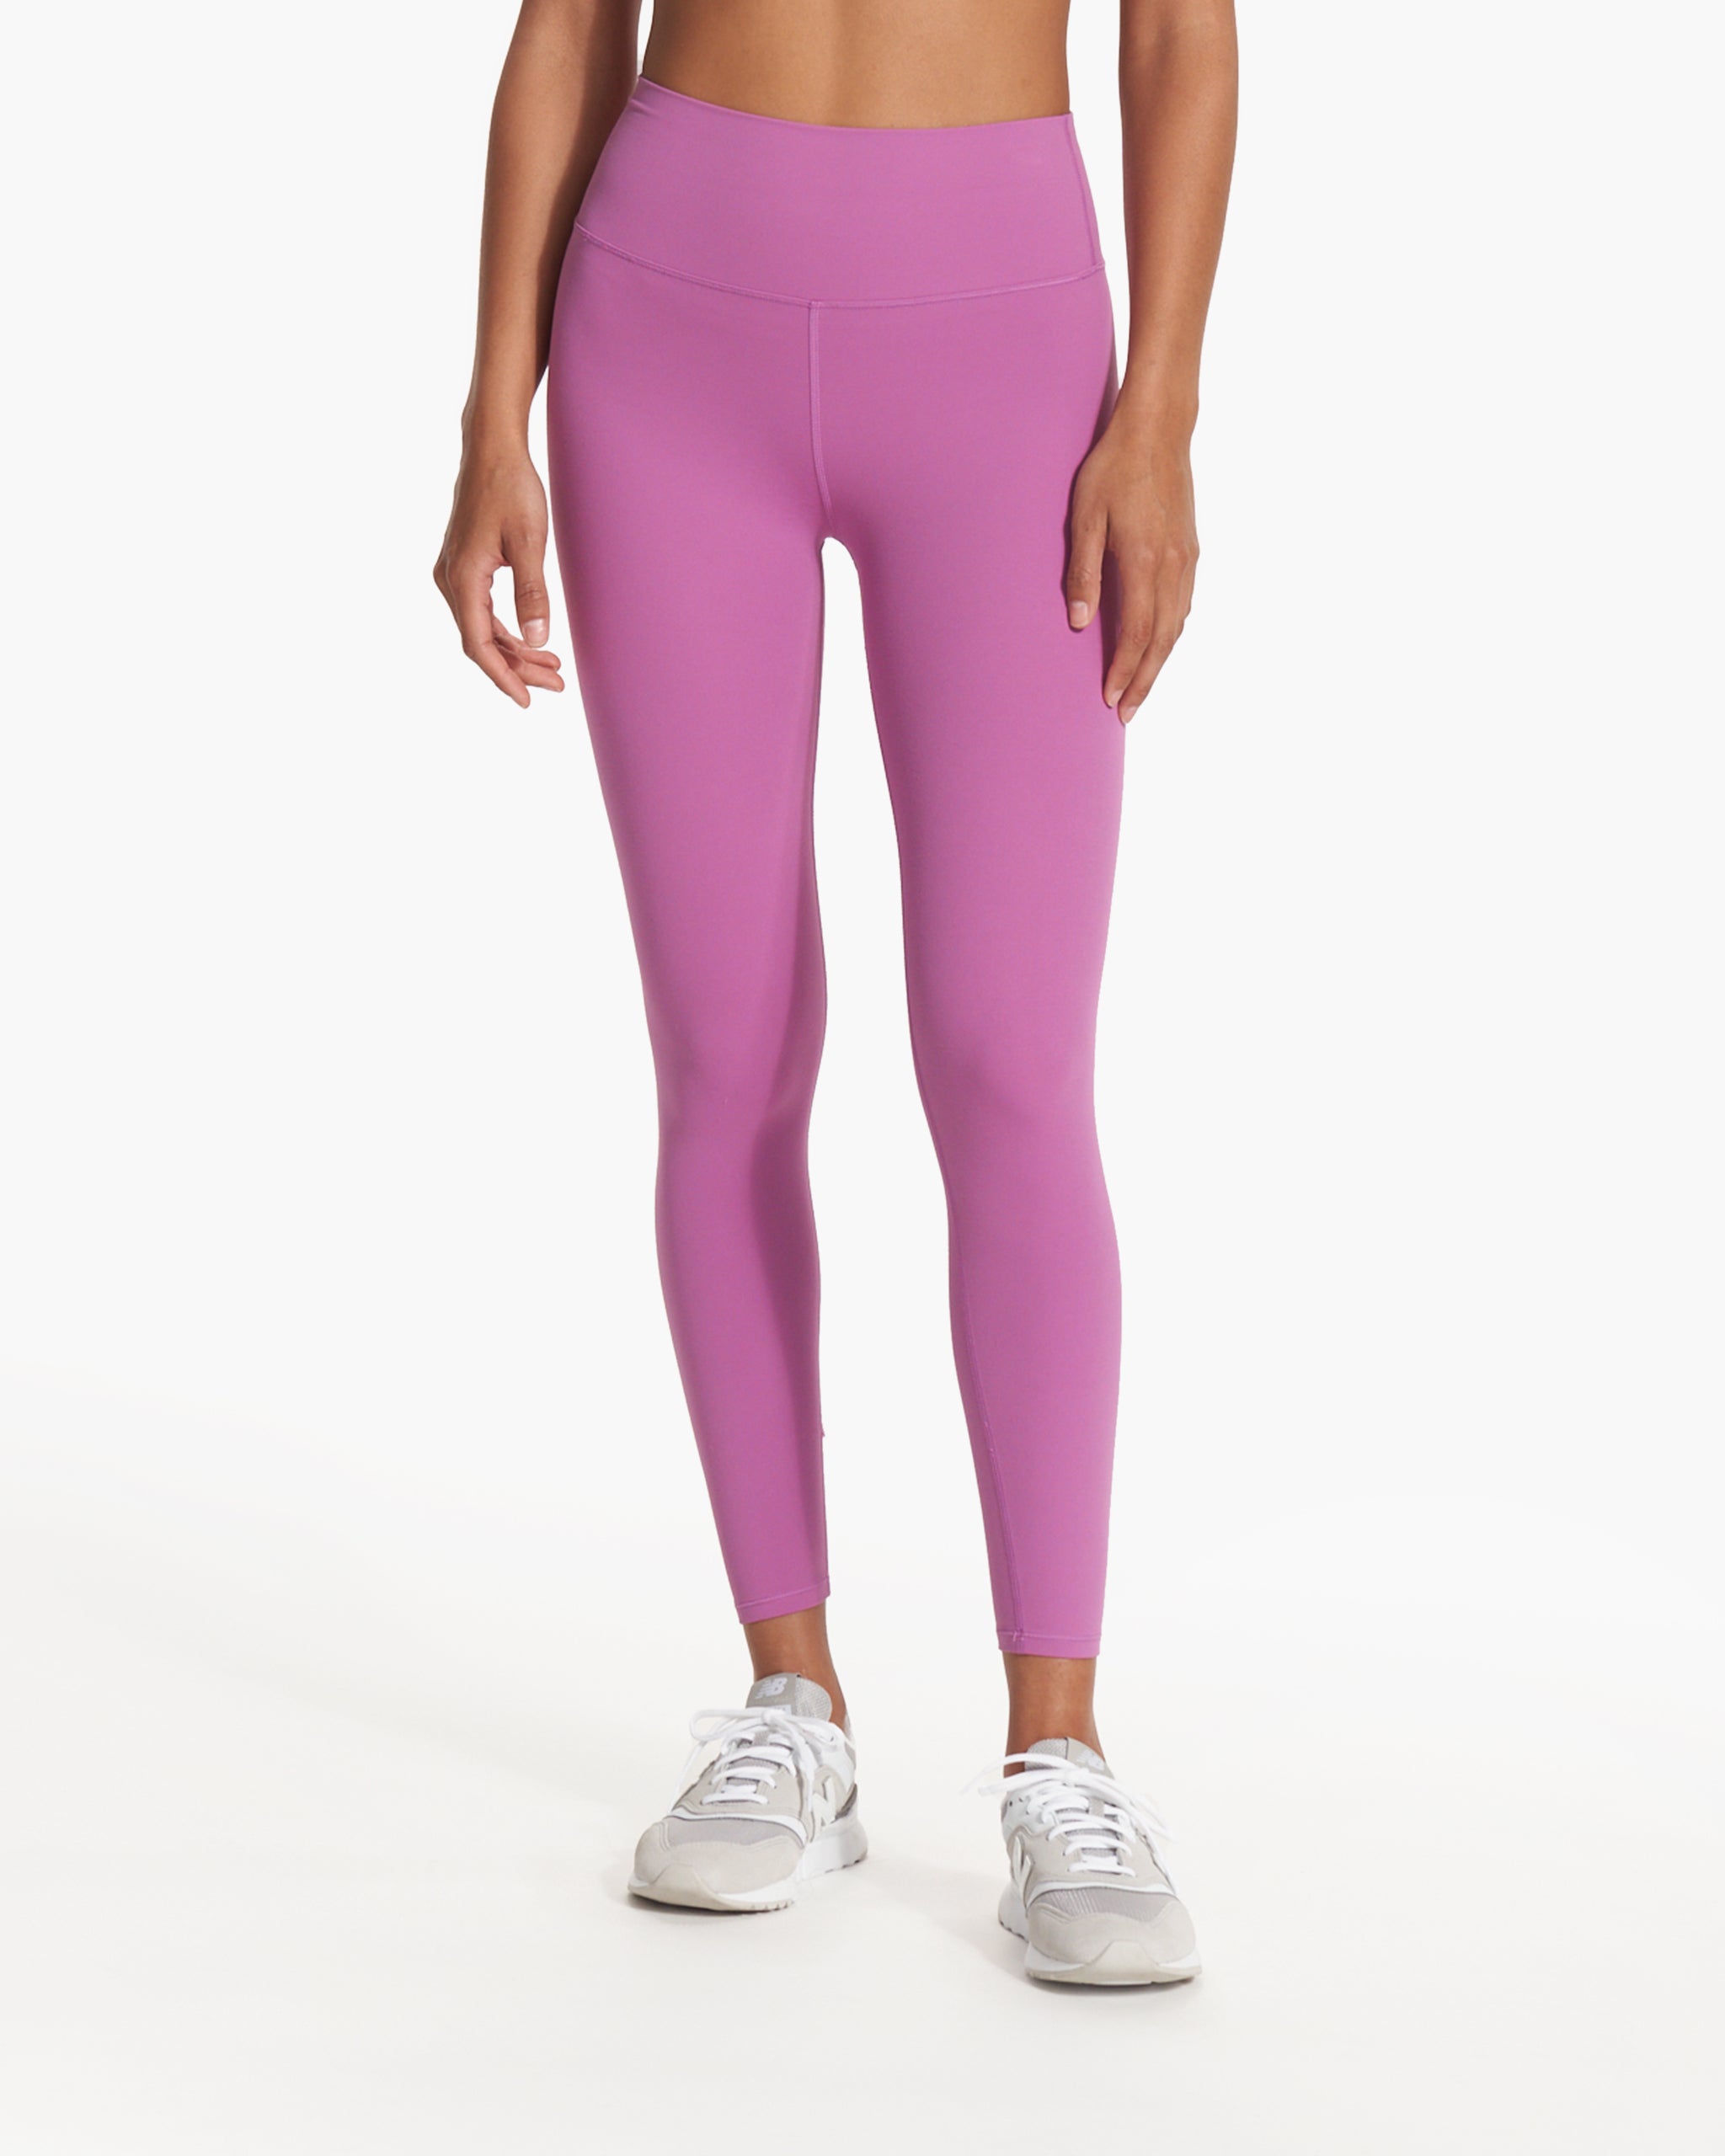 Lululemon Ultraviolet Pink Seamless High Rise Zone In Tights, Women's 4